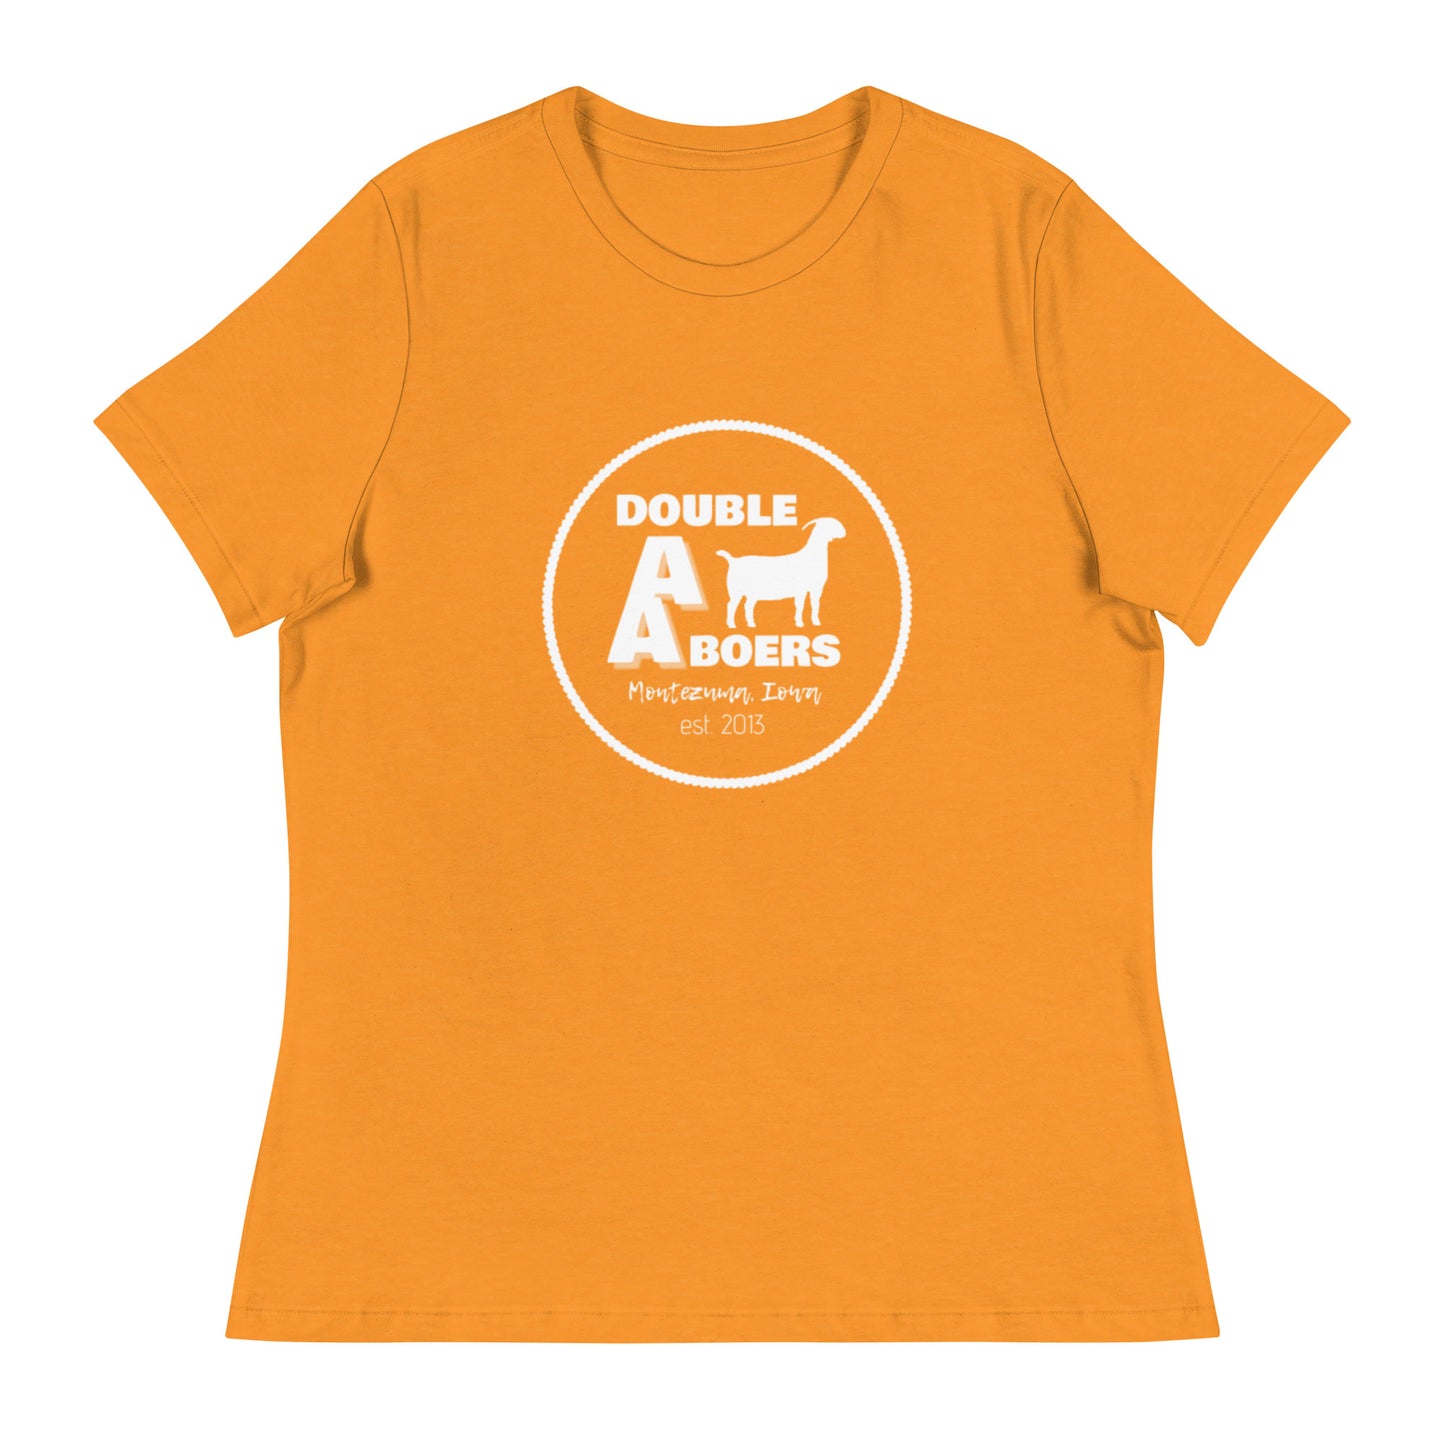 DOUBLE A BOERS - Women's Relaxed T-Shirt